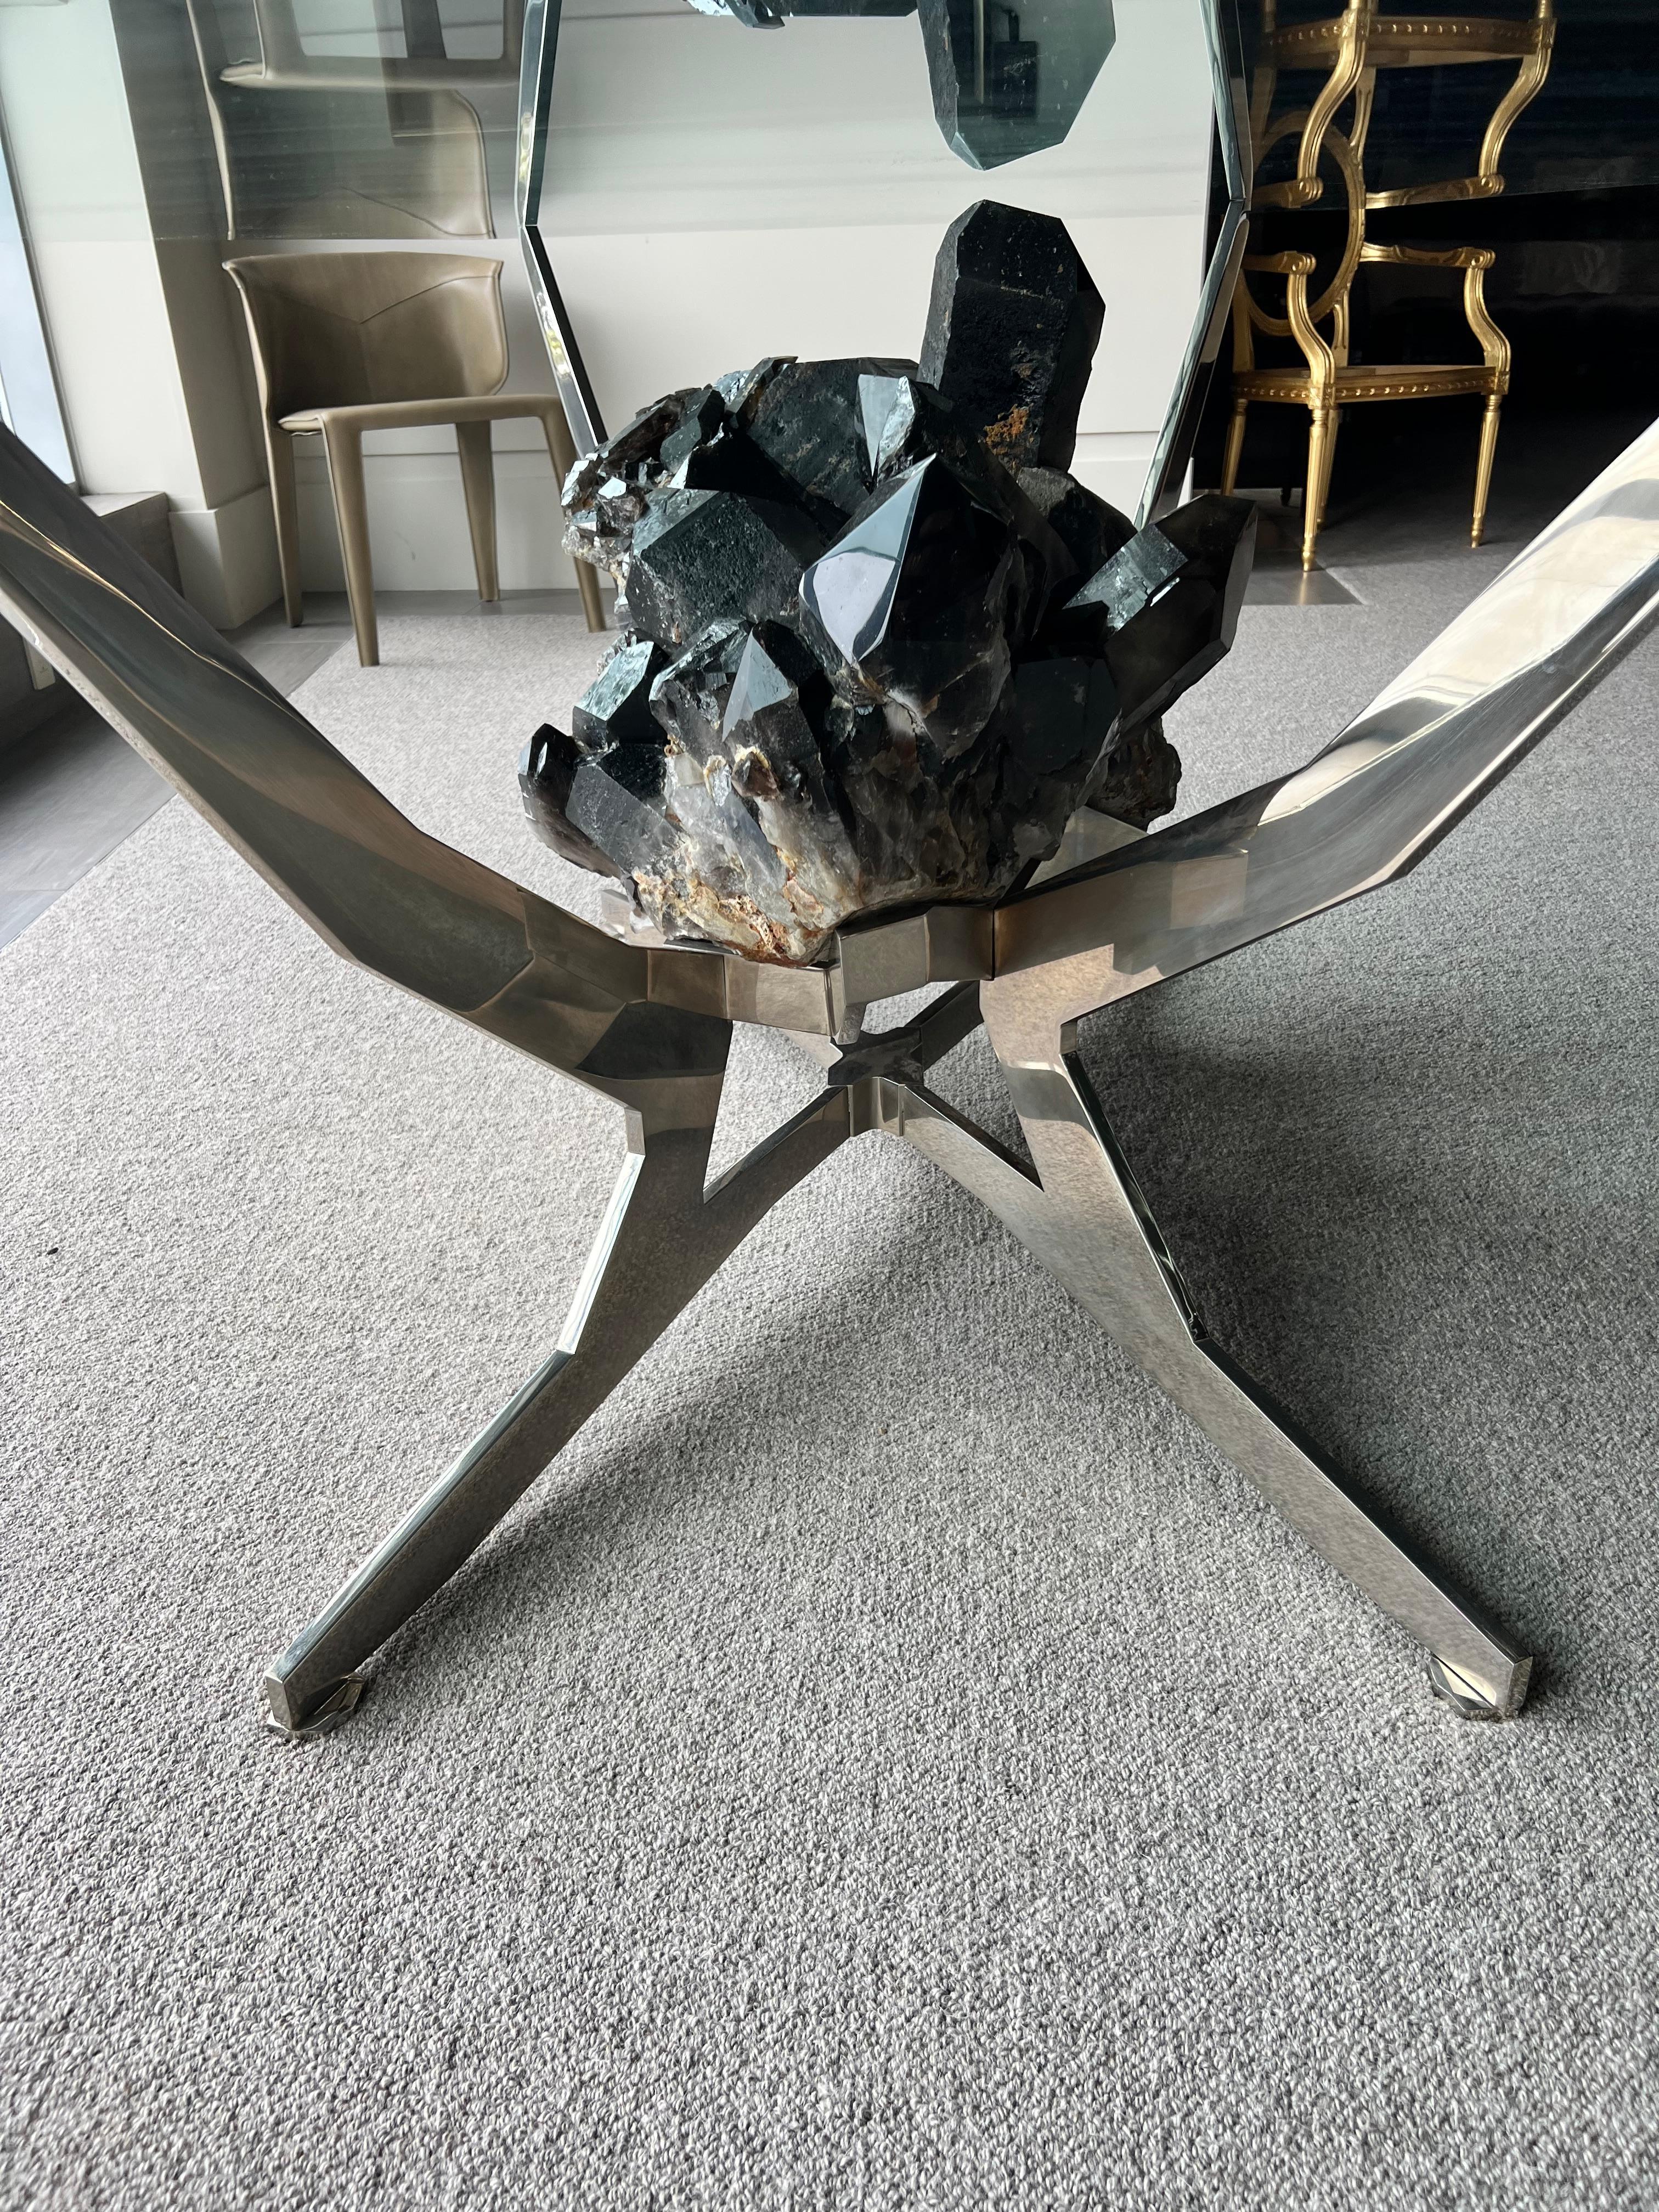 Faceted Smokey Quartz Dining Room Table By Giuliano Tincani (ITALY)Nickel with Glass Top